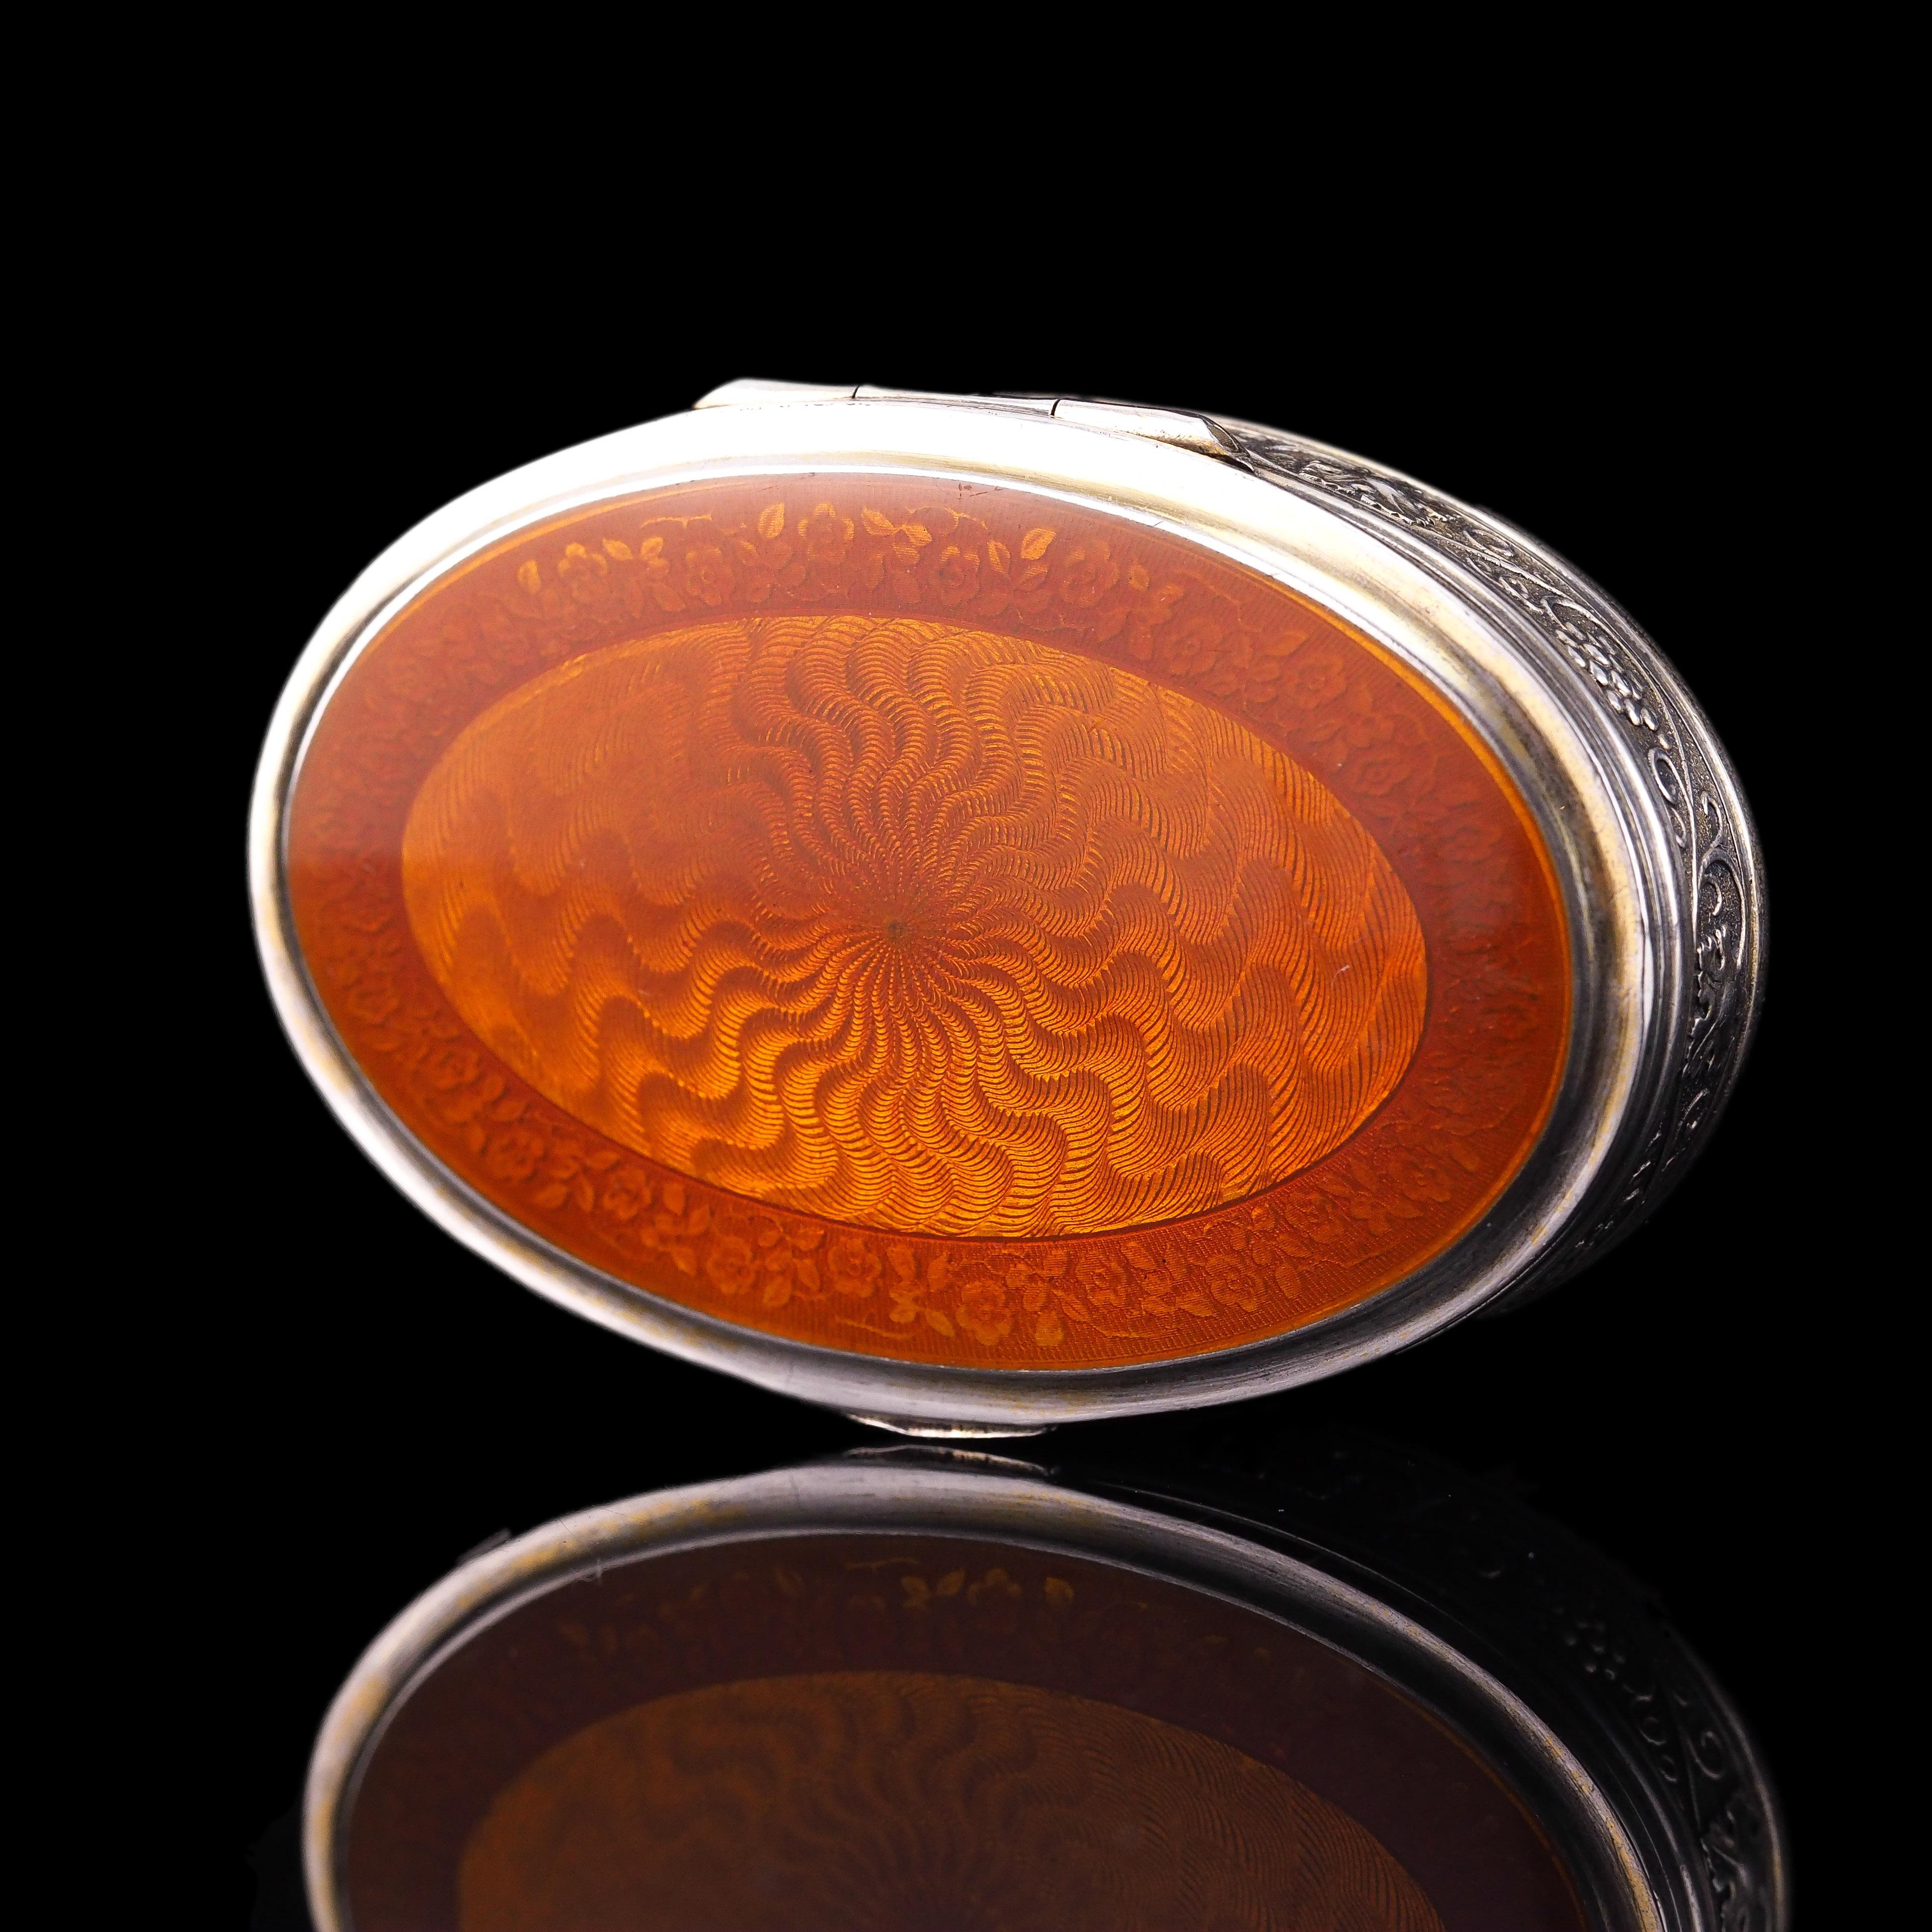 We are delighted to offer this solid silver orange guilloche enamel box made by the famous Norwegian maker, David Anderson with marks c.1888-1925.

(Price negotiations may be possible under certain criteria, please contact us or search for Artisan